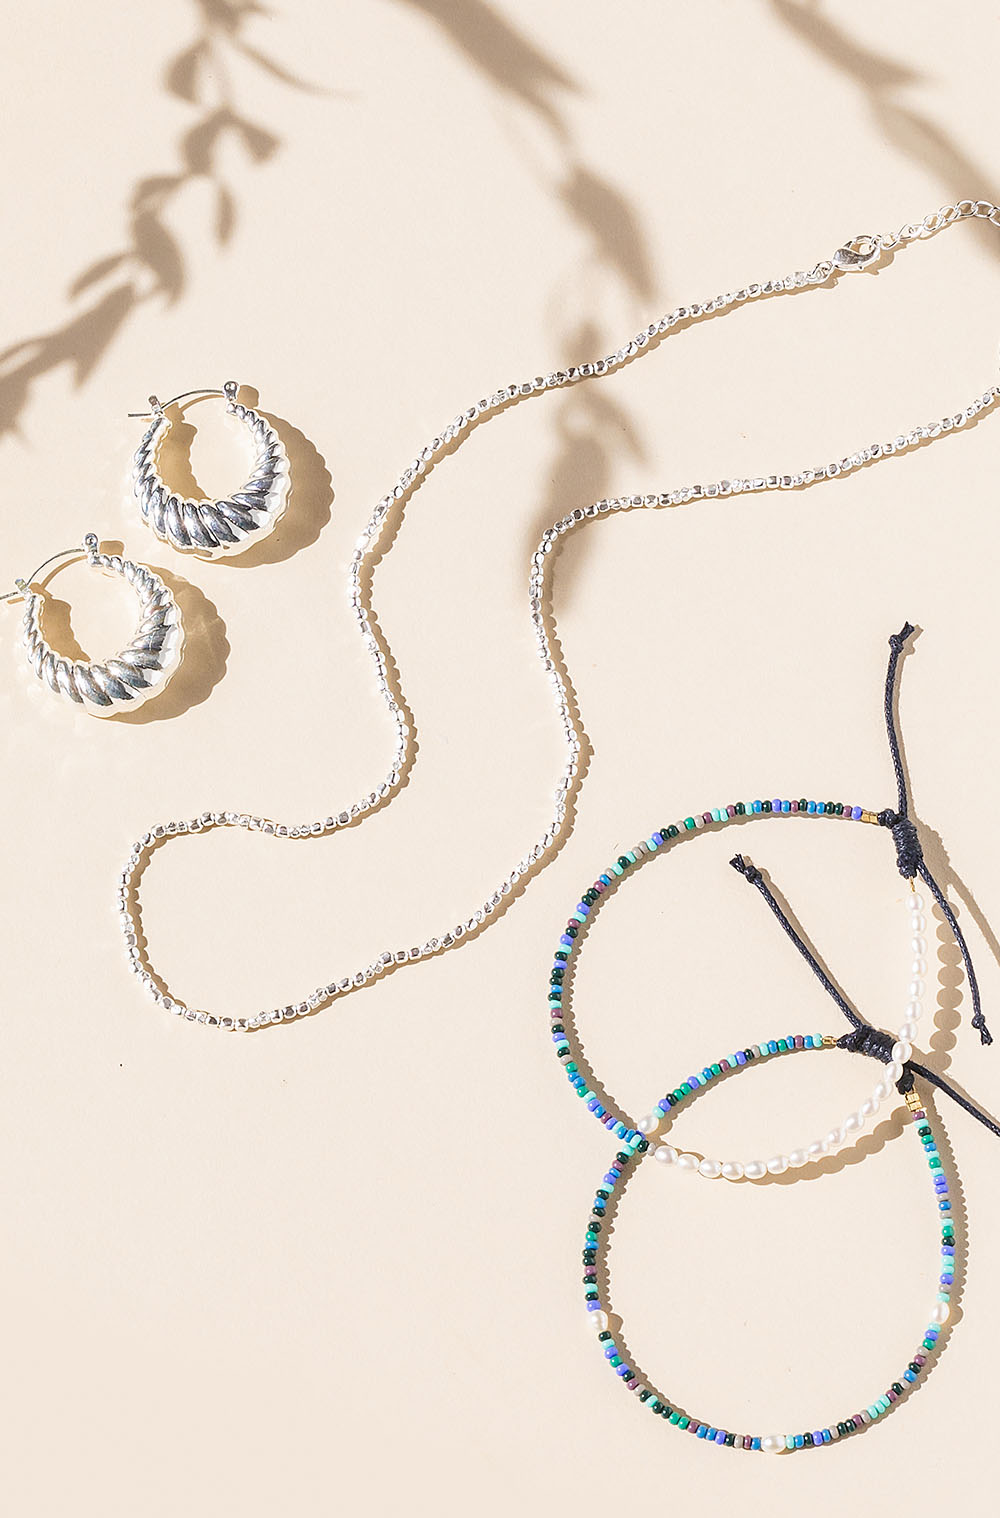 fair trade trades of hope jewelry ethically made by artisan partners in East Asia and India 